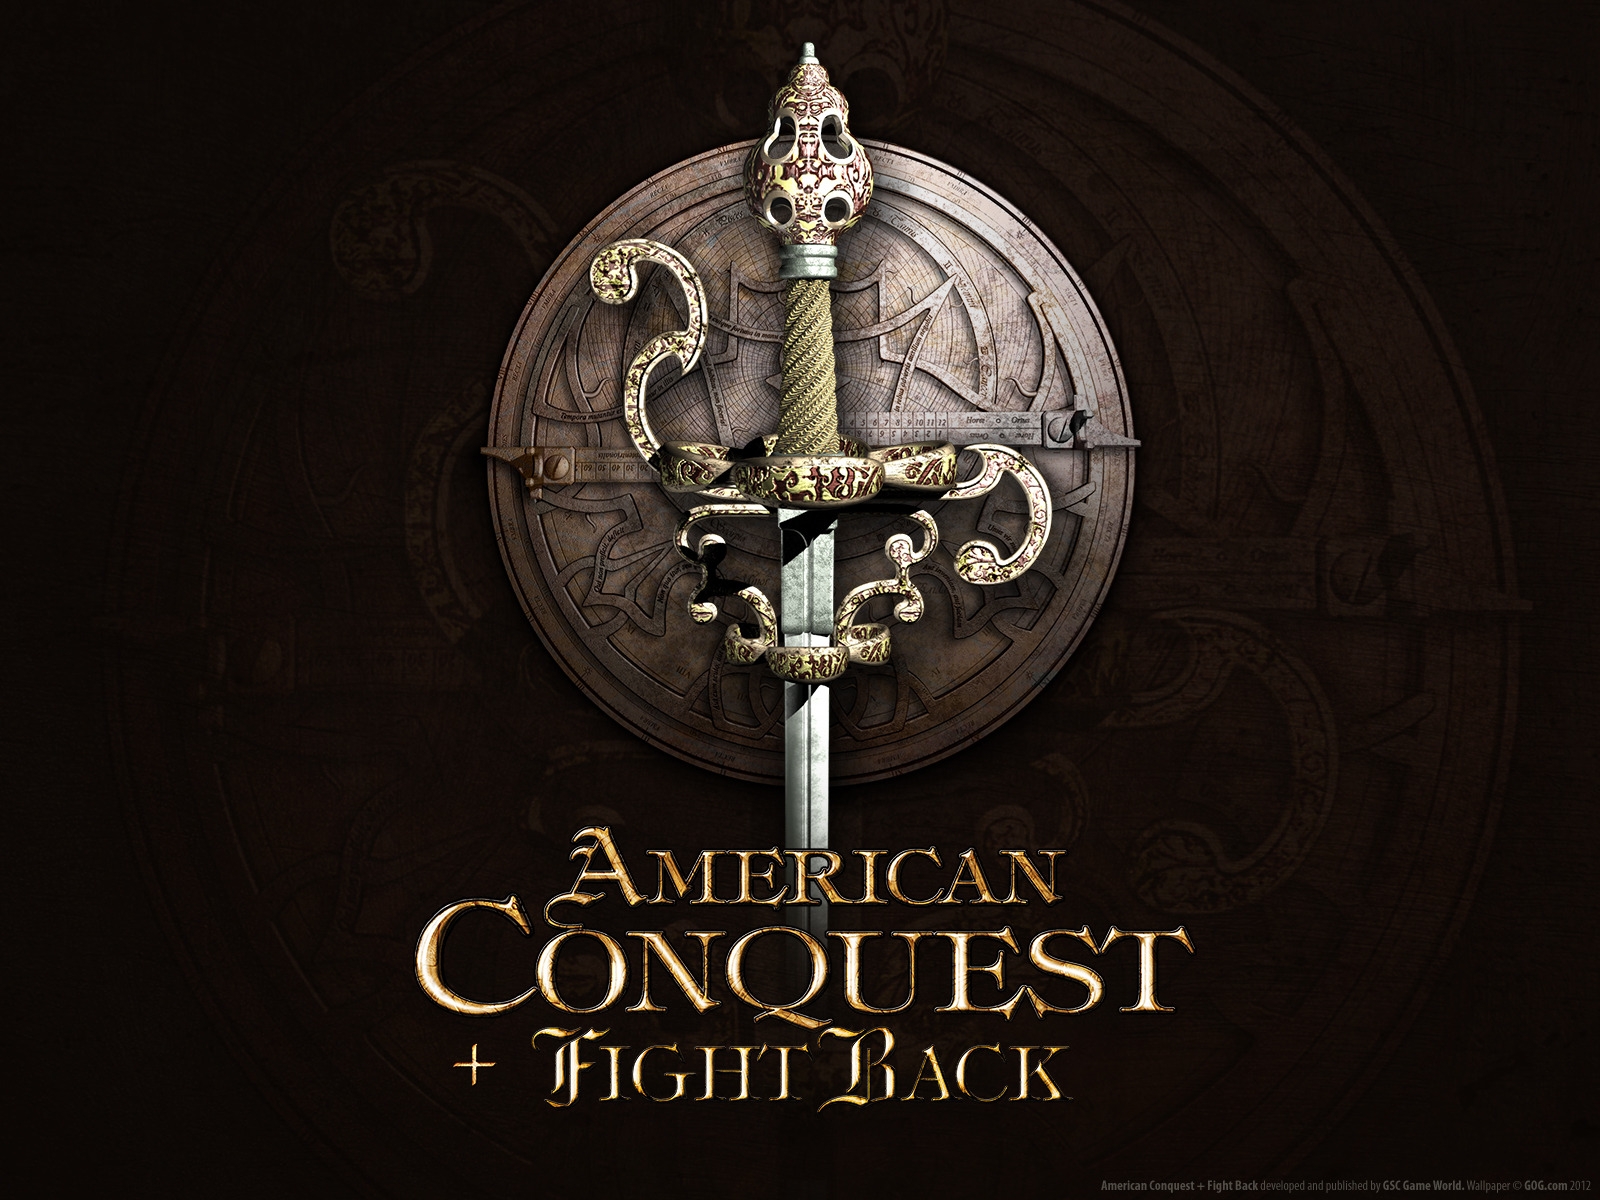 American Conquest for 1600 x 1200 resolution